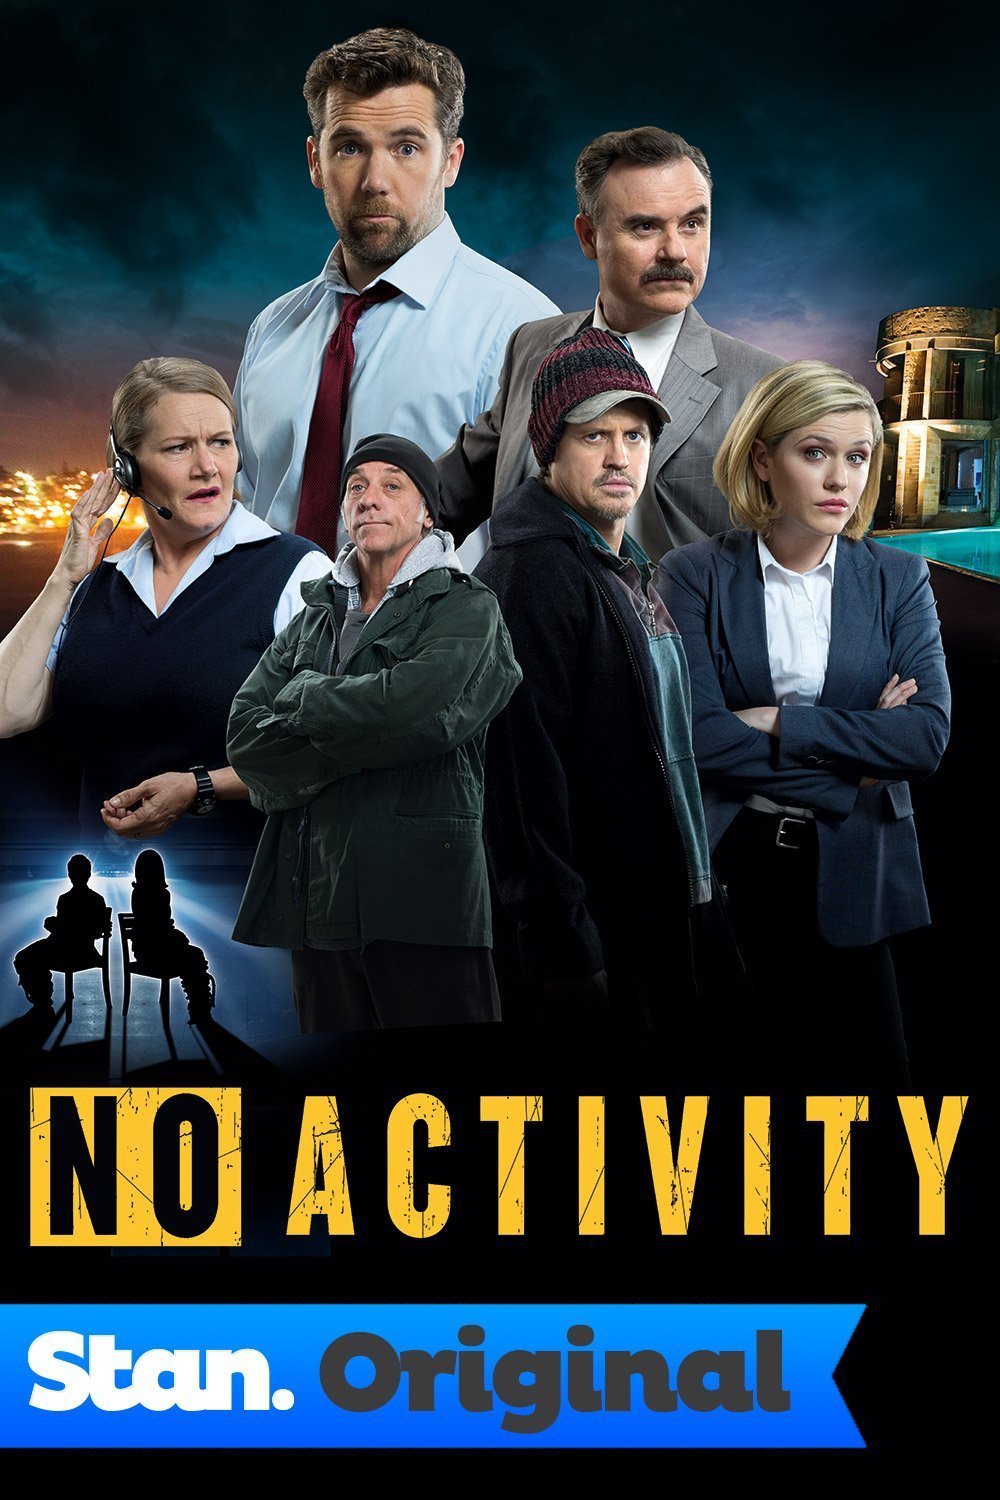 Poster of the movie No Activity